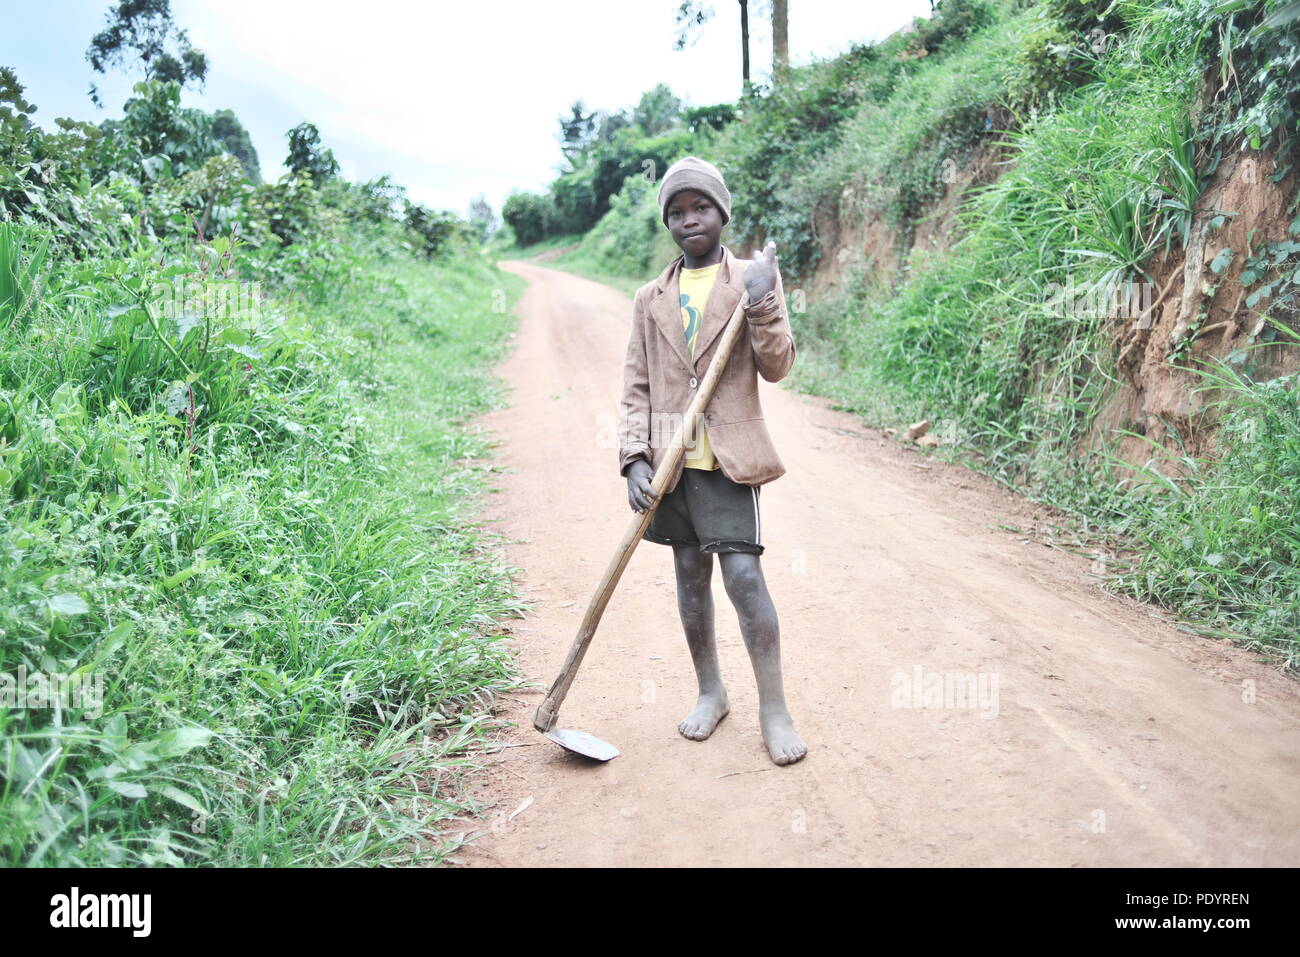 Young Ugandan boy stands in the middle of a dirt road holding farm tools, barefoot, looking at the camera Stock Photo